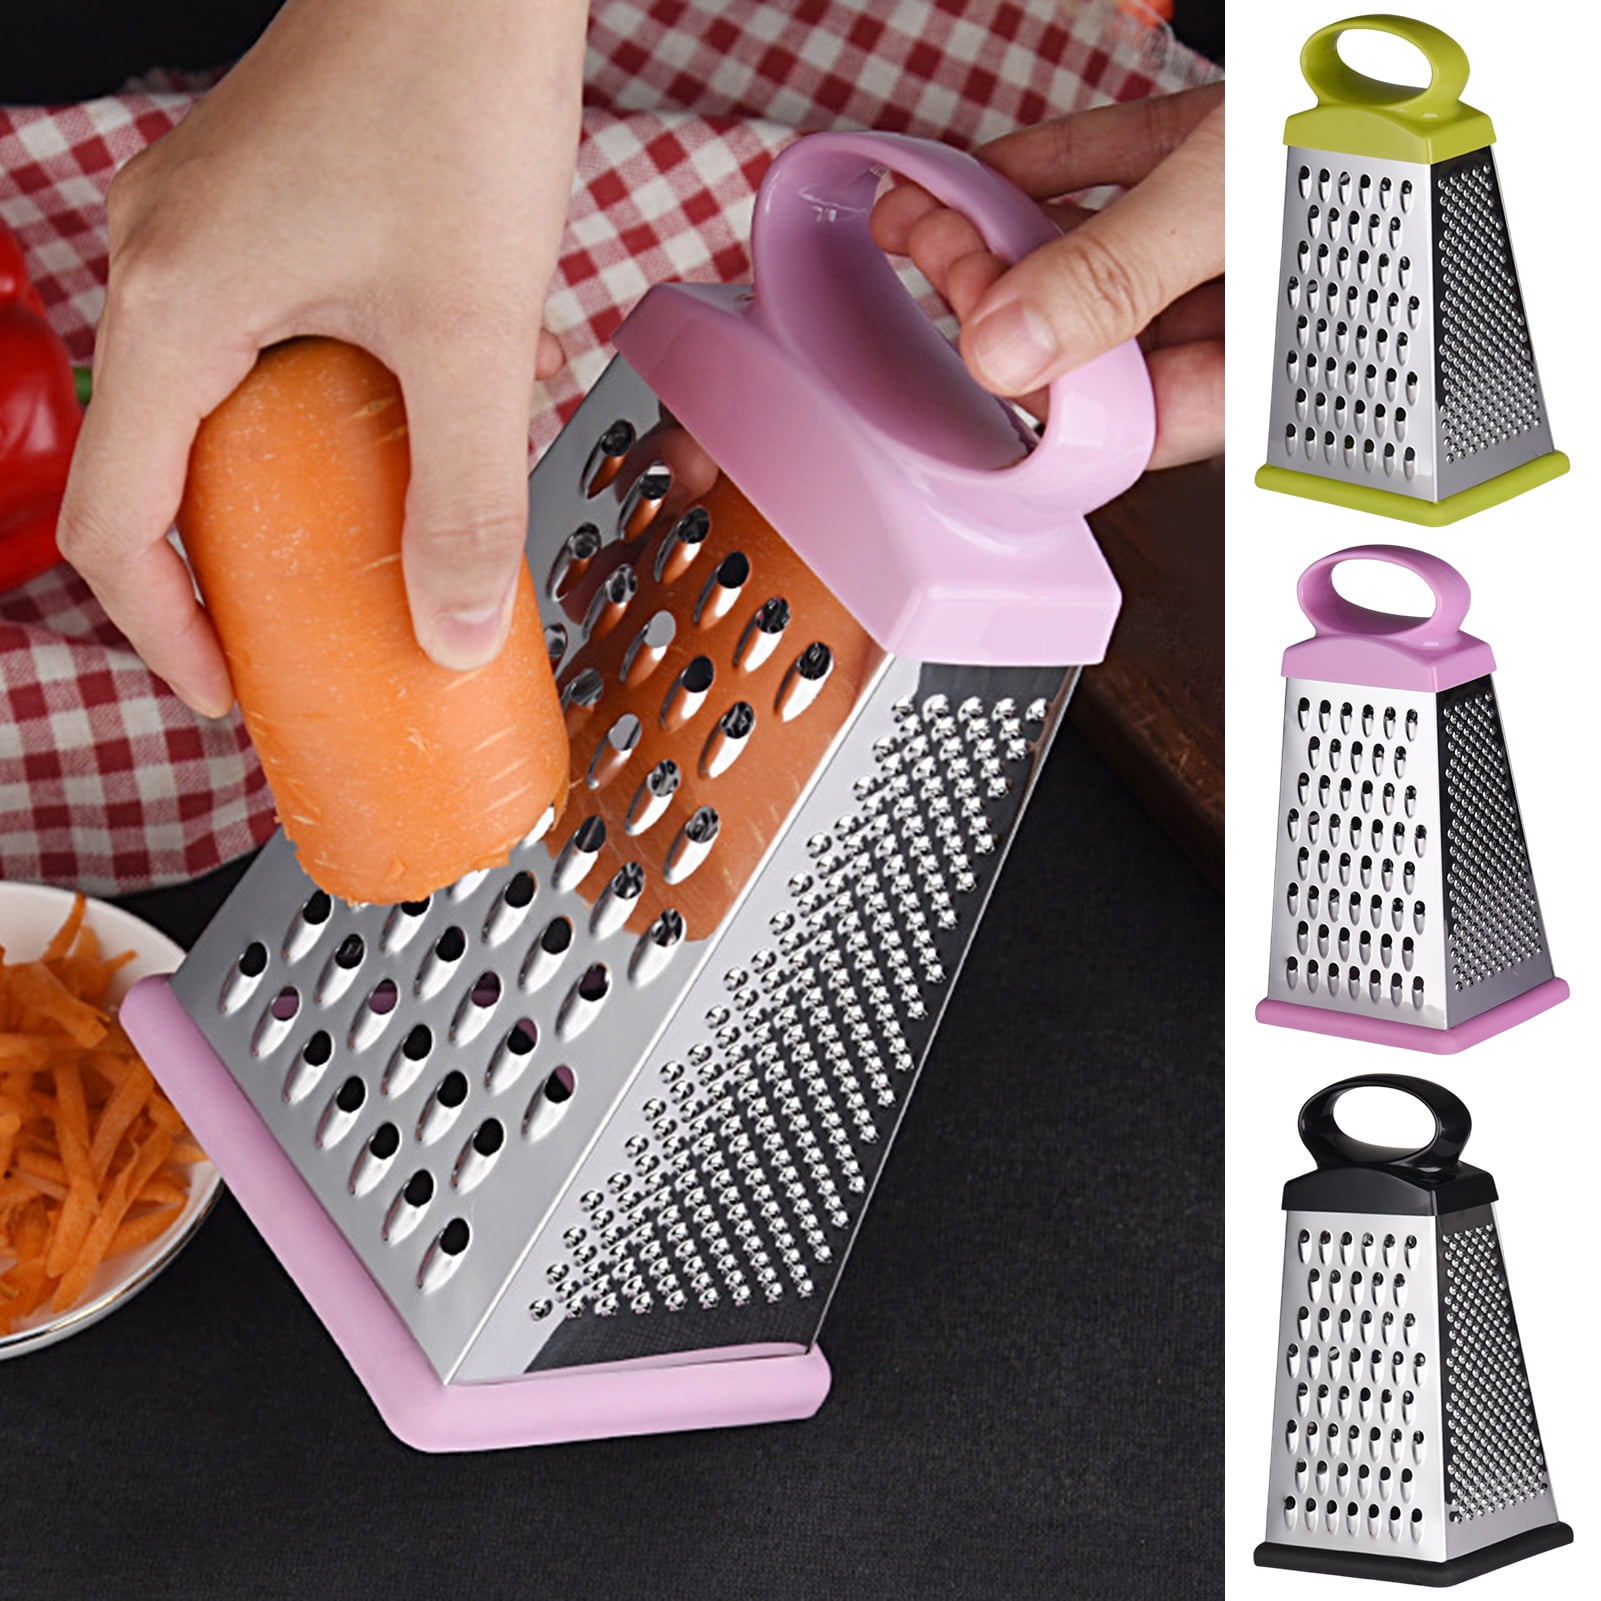 Qhomic Professional Cheese Grater 5 in 1 Vegetable Slicer/Salad